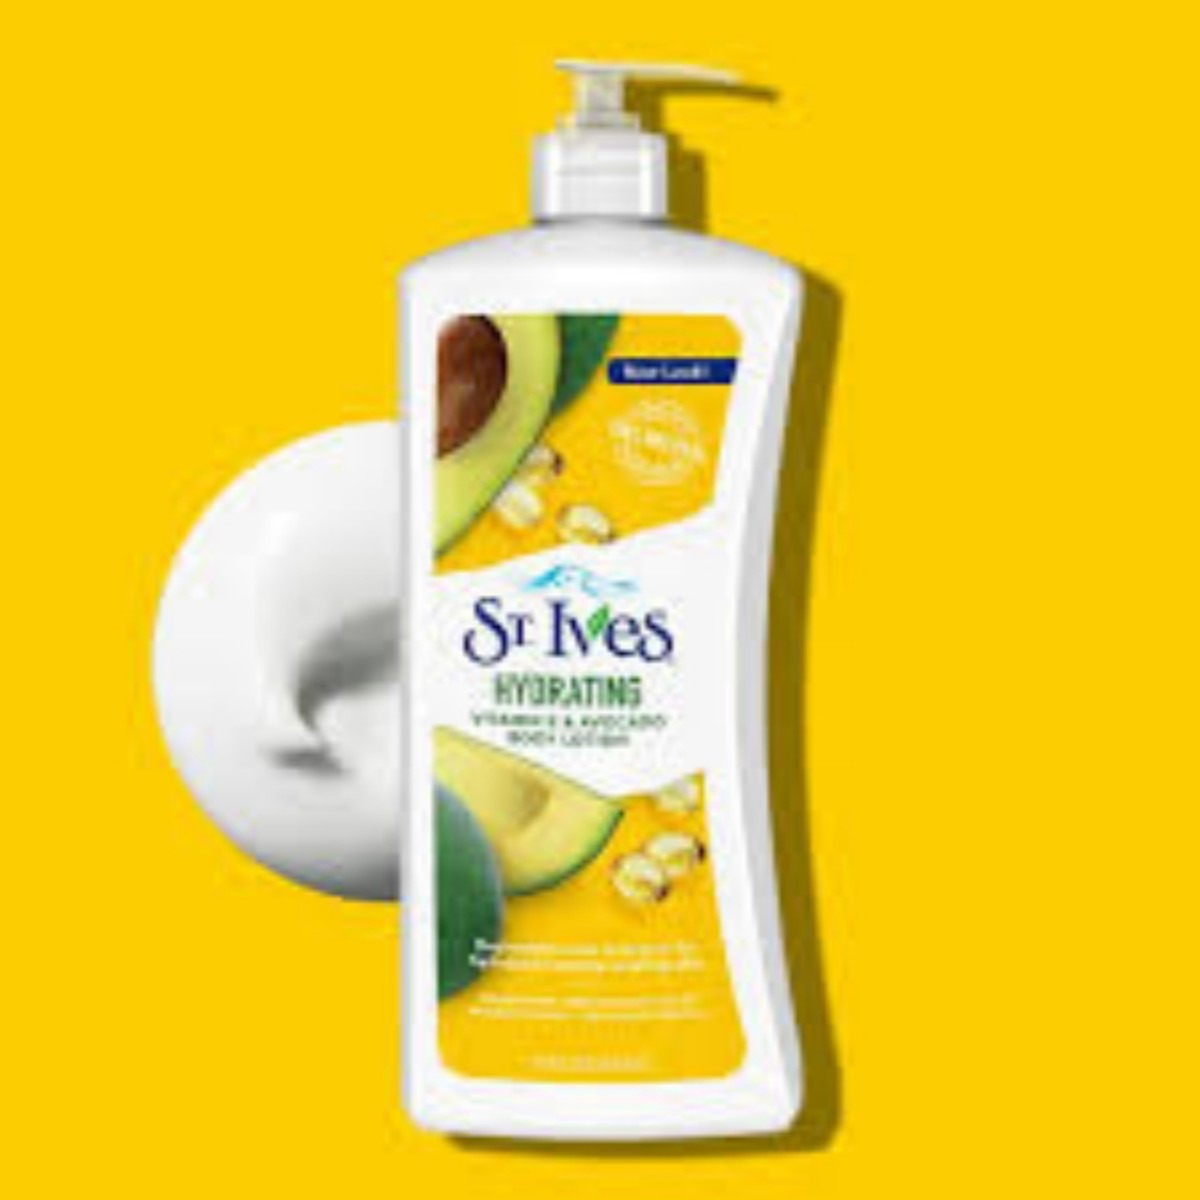 A Nourishing Oasis for Your Skin - St. Ives Hydrating Body Lotion - Review